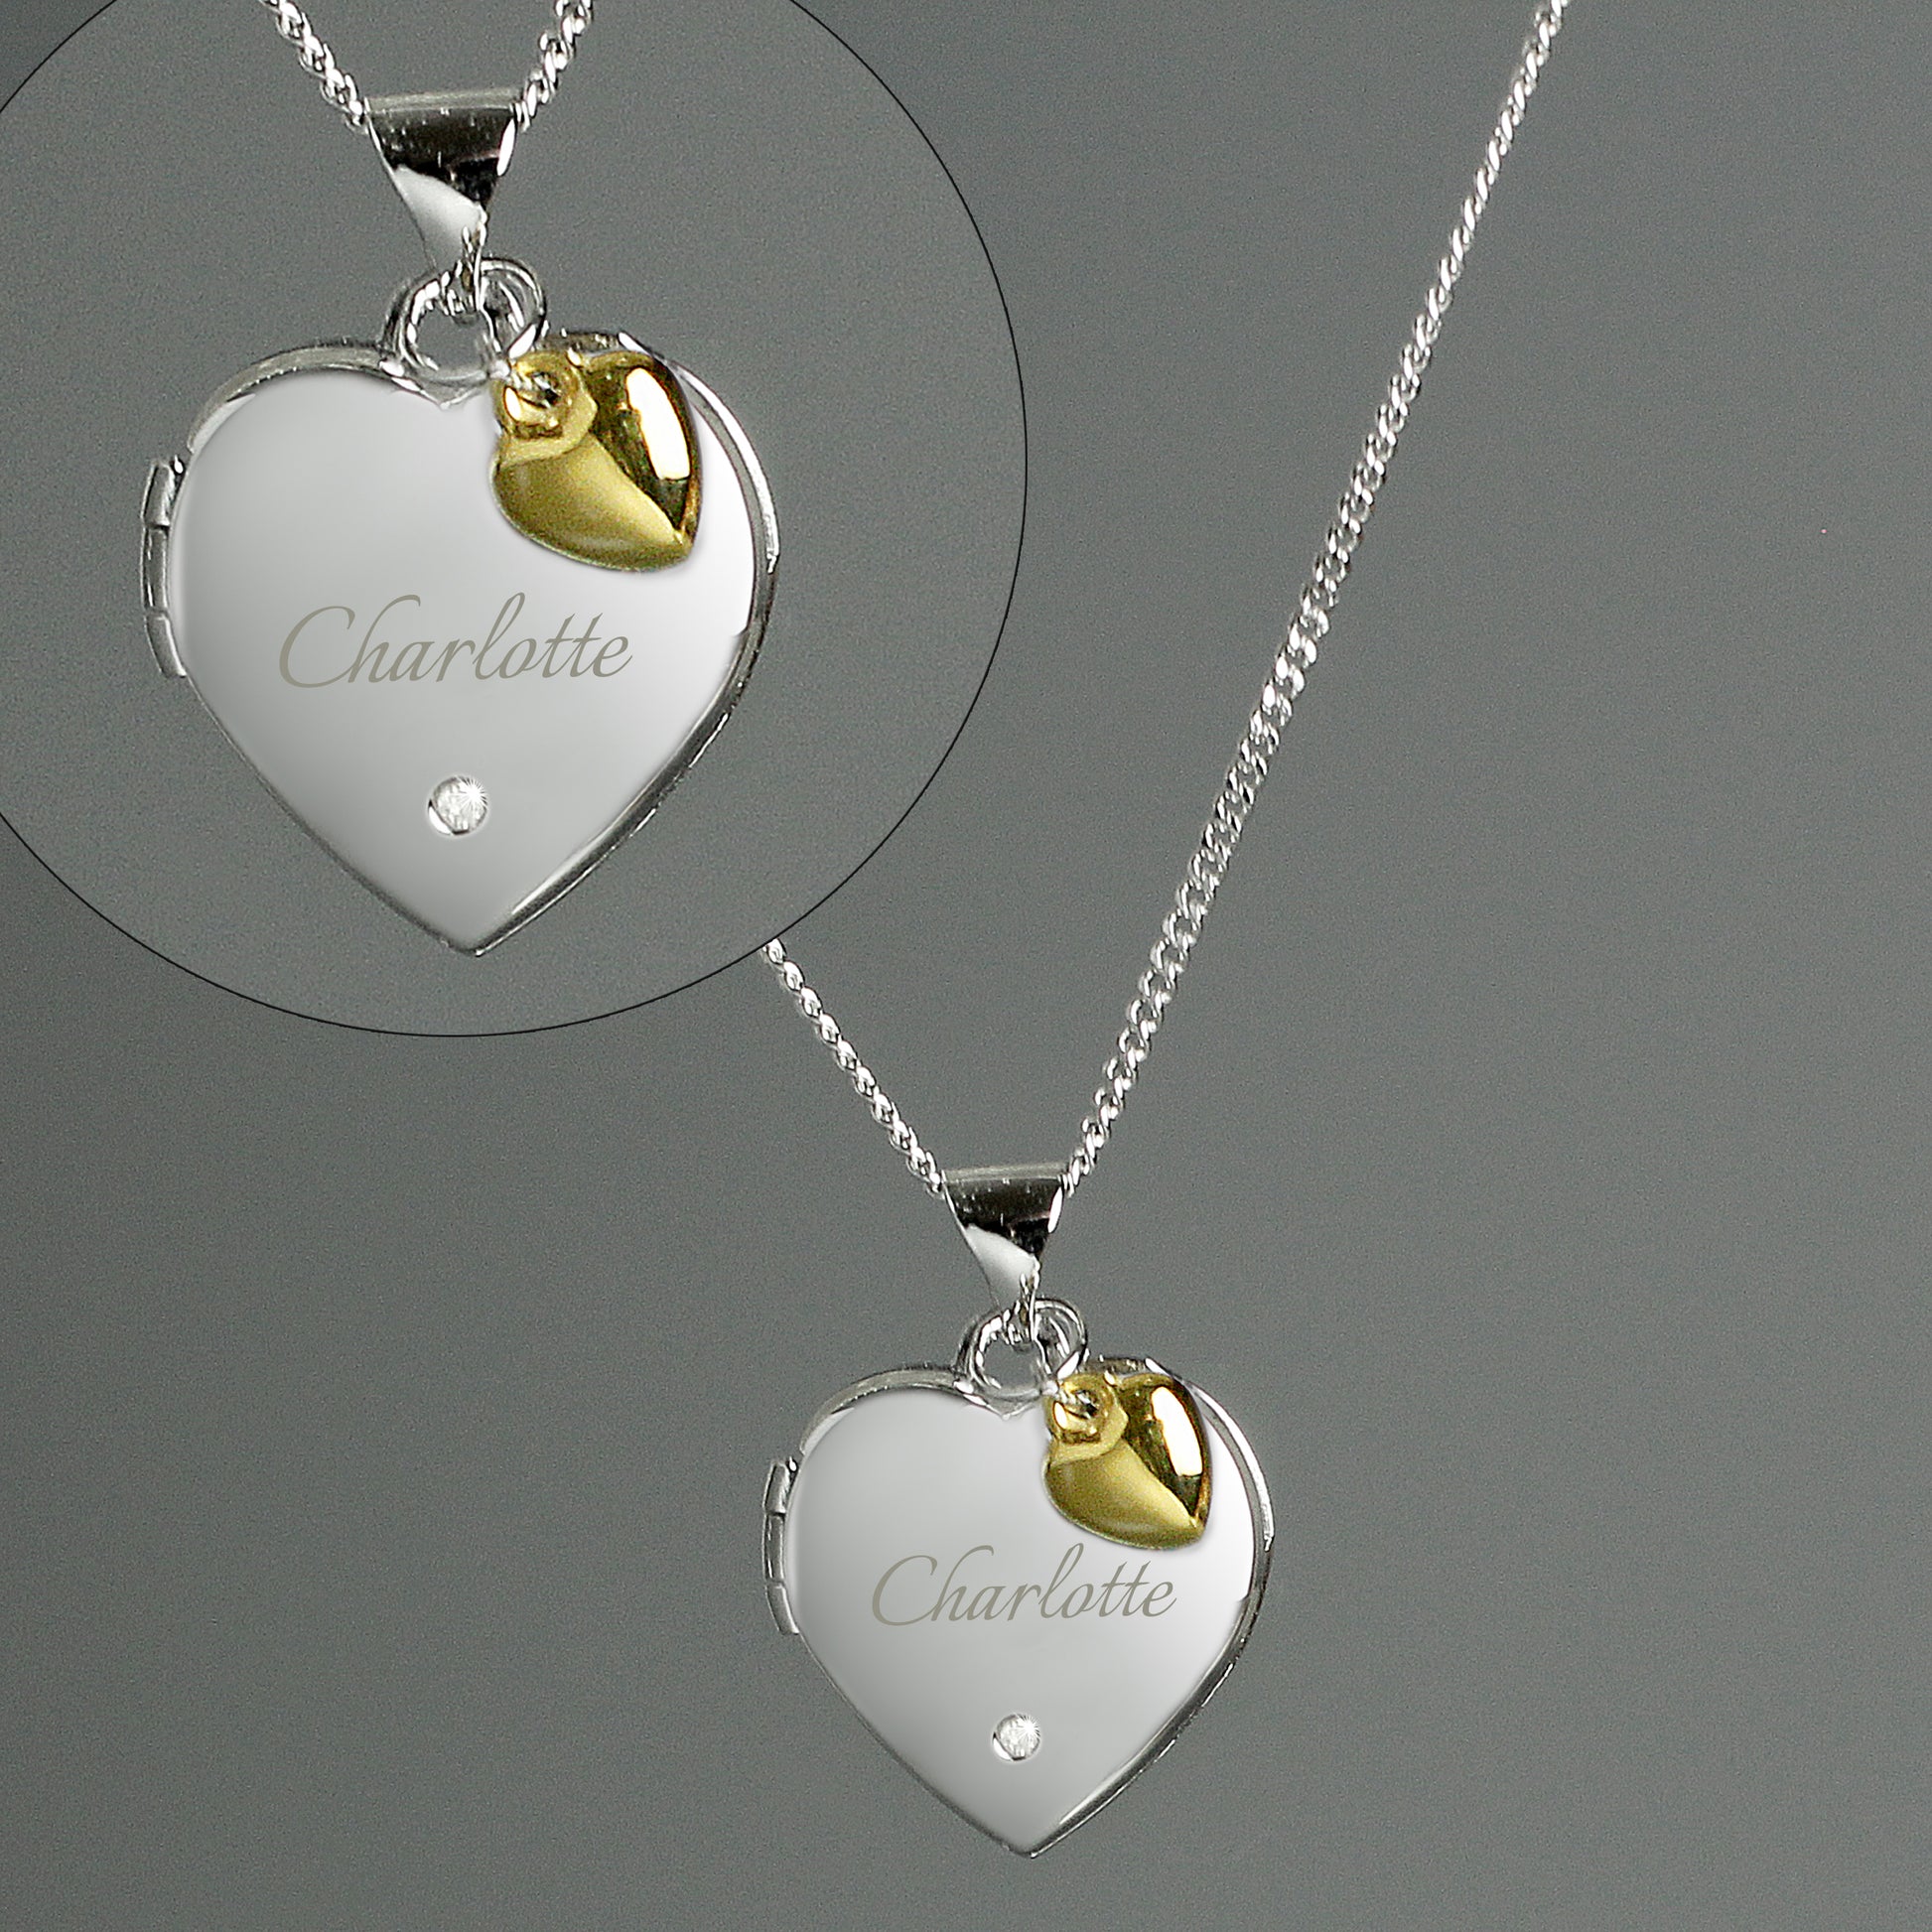 dheart shaped locket with a tiny diamante on the front and engraved with a name of your choice in script font. The locket carries a tiny gold plated heart. The locket can take up to two photos. Sterling silver chain.etail of engraving on personalised locket